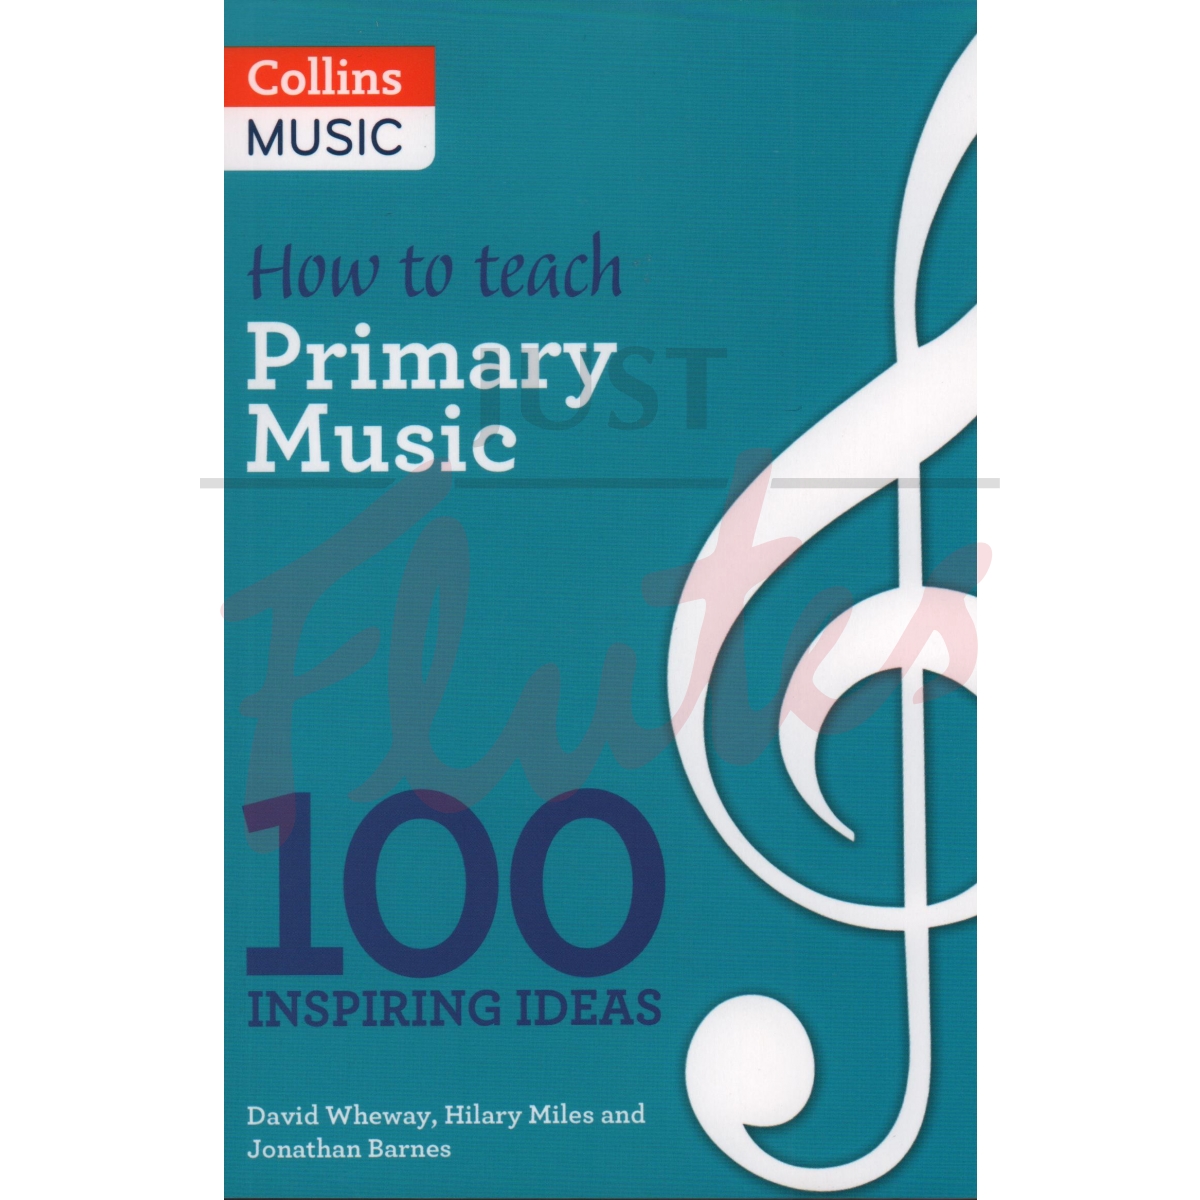 How to Teach Primary Music - 100 Inspiring Ideas